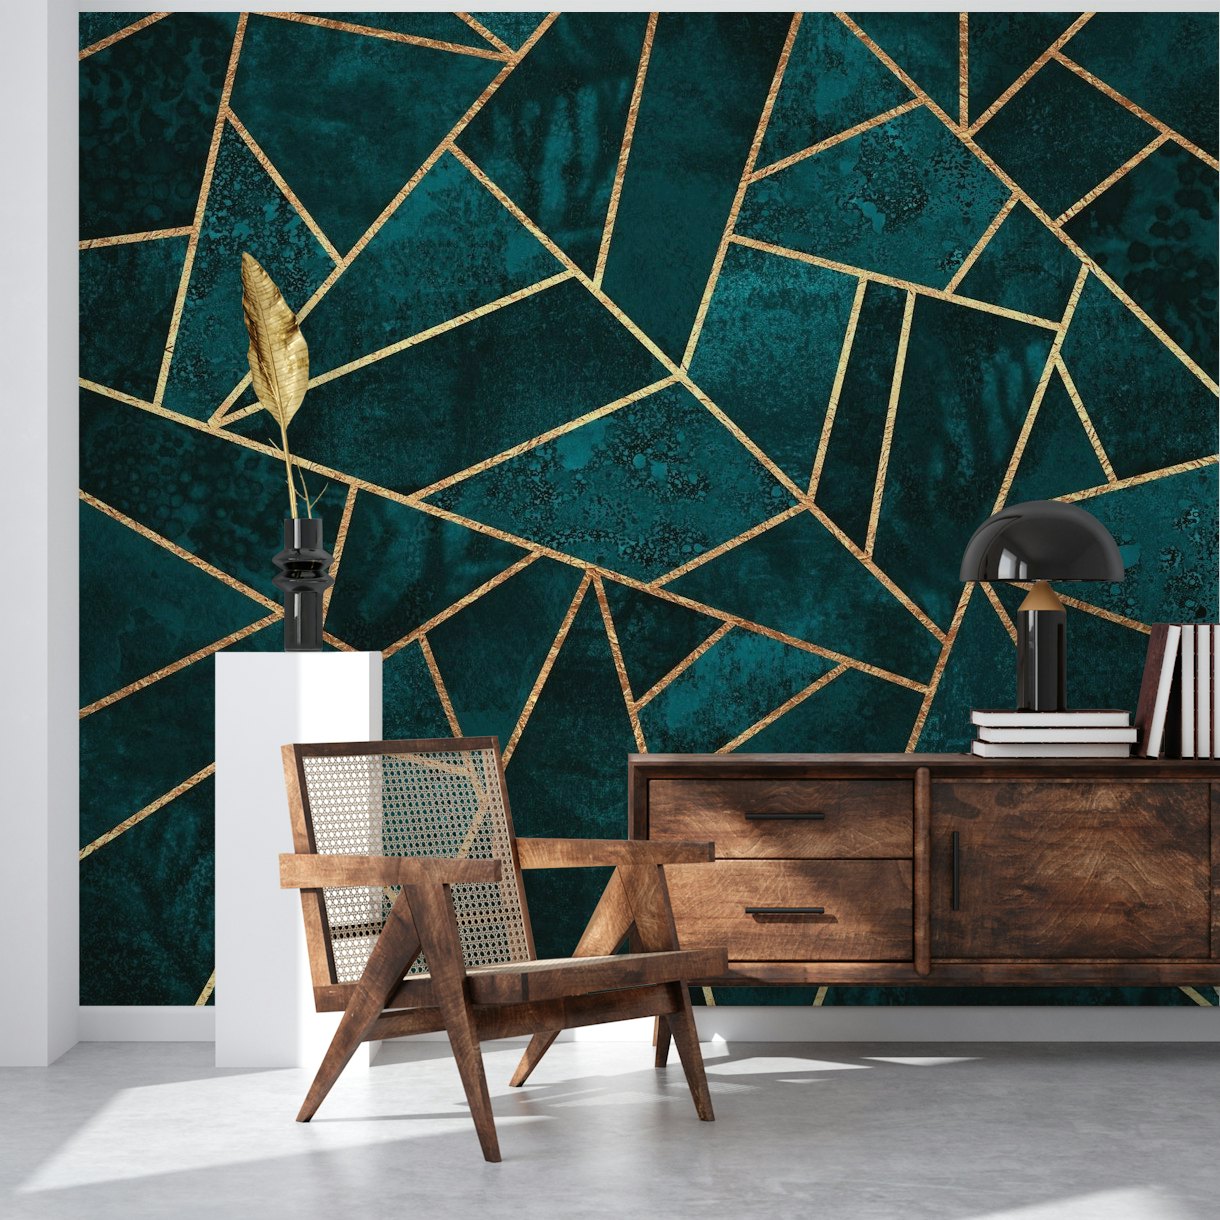 Luxurious dark teal stone wallpaper with captivating mosaic design